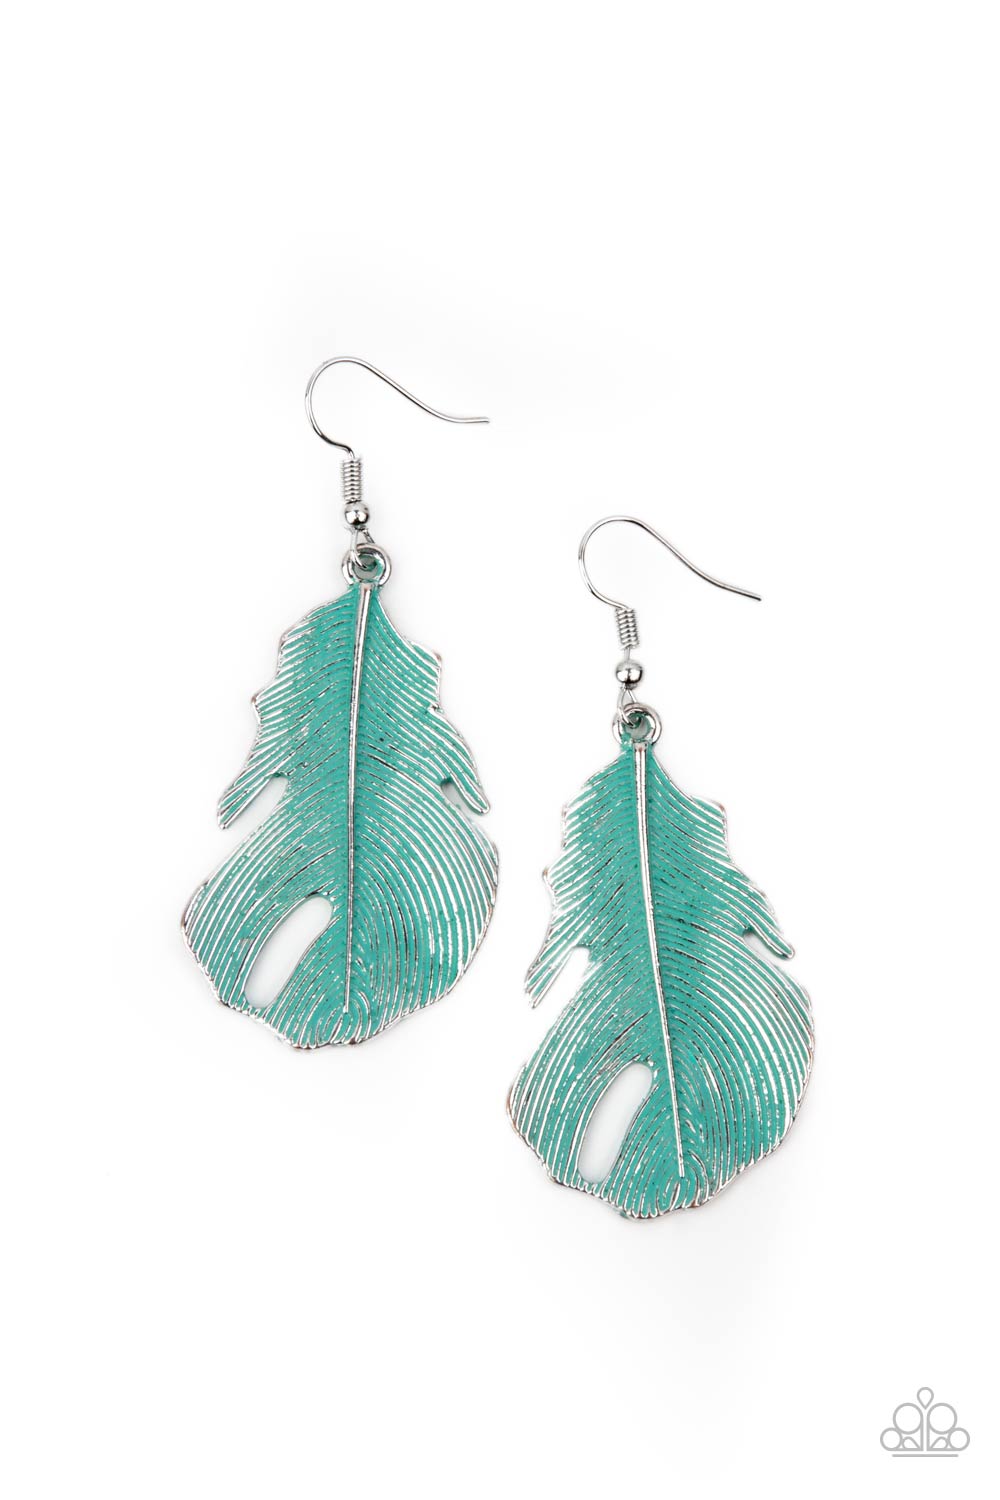 Paparazzi Accessories Heads QUILL Roll - Blue Earrings - Lady T Accessories